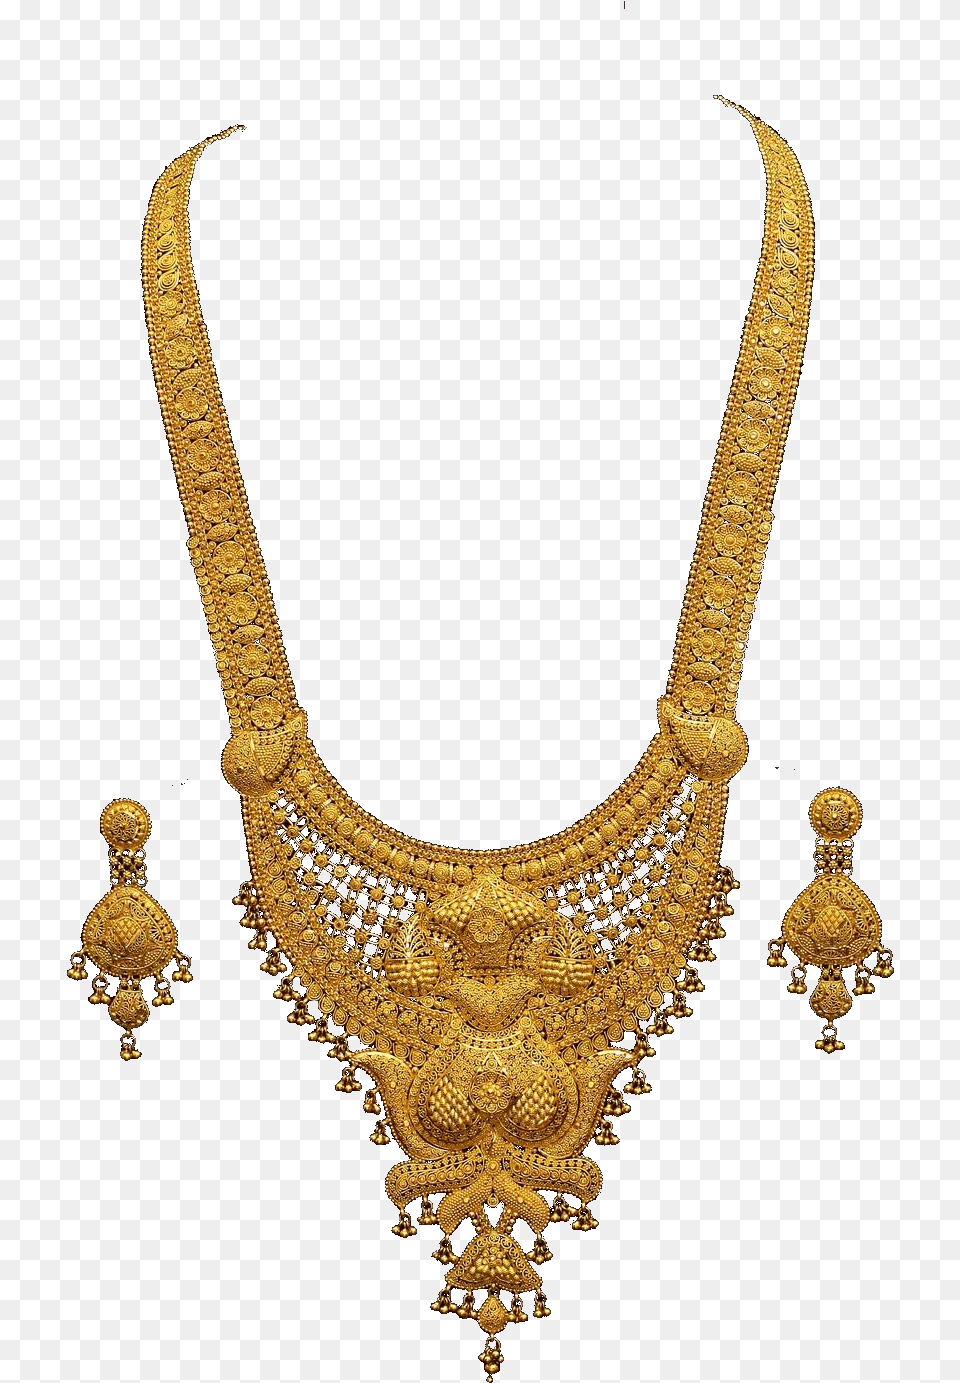 Hd Trusted Gold Transparent Background Gold Rani Haar Design, Accessories, Jewelry, Necklace Png Image